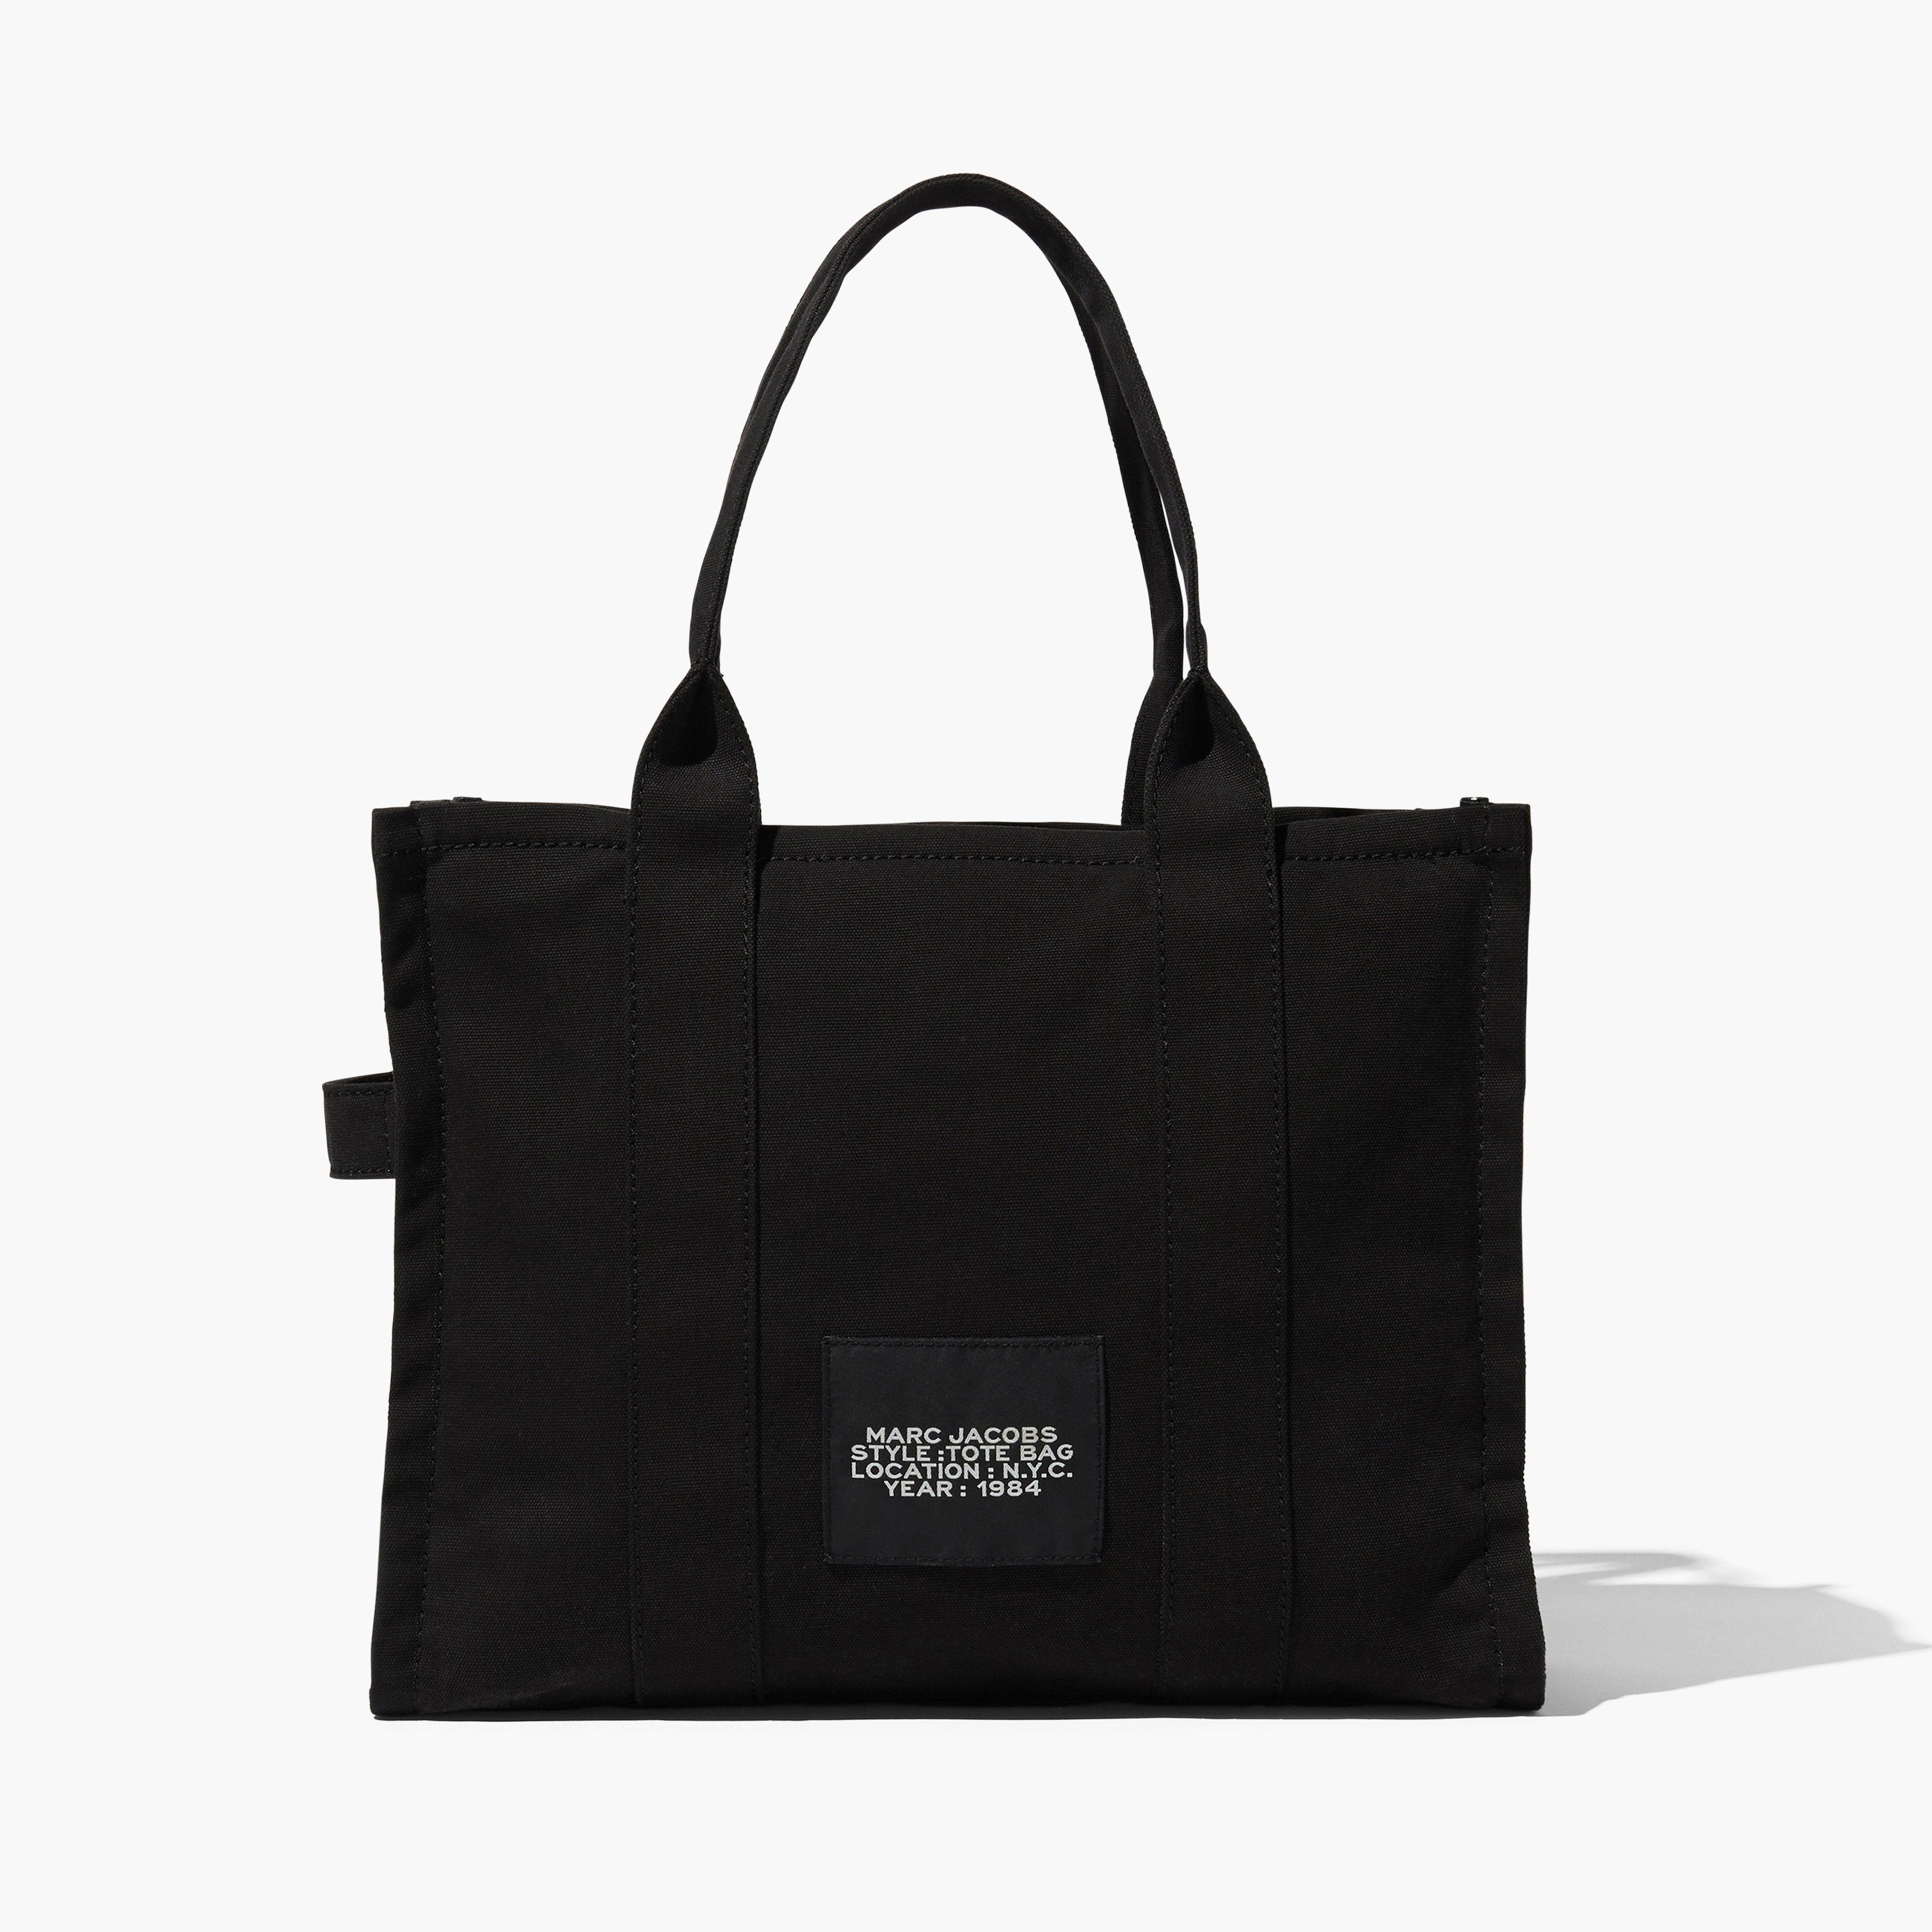 THE LARGE TOTE BAG - 5